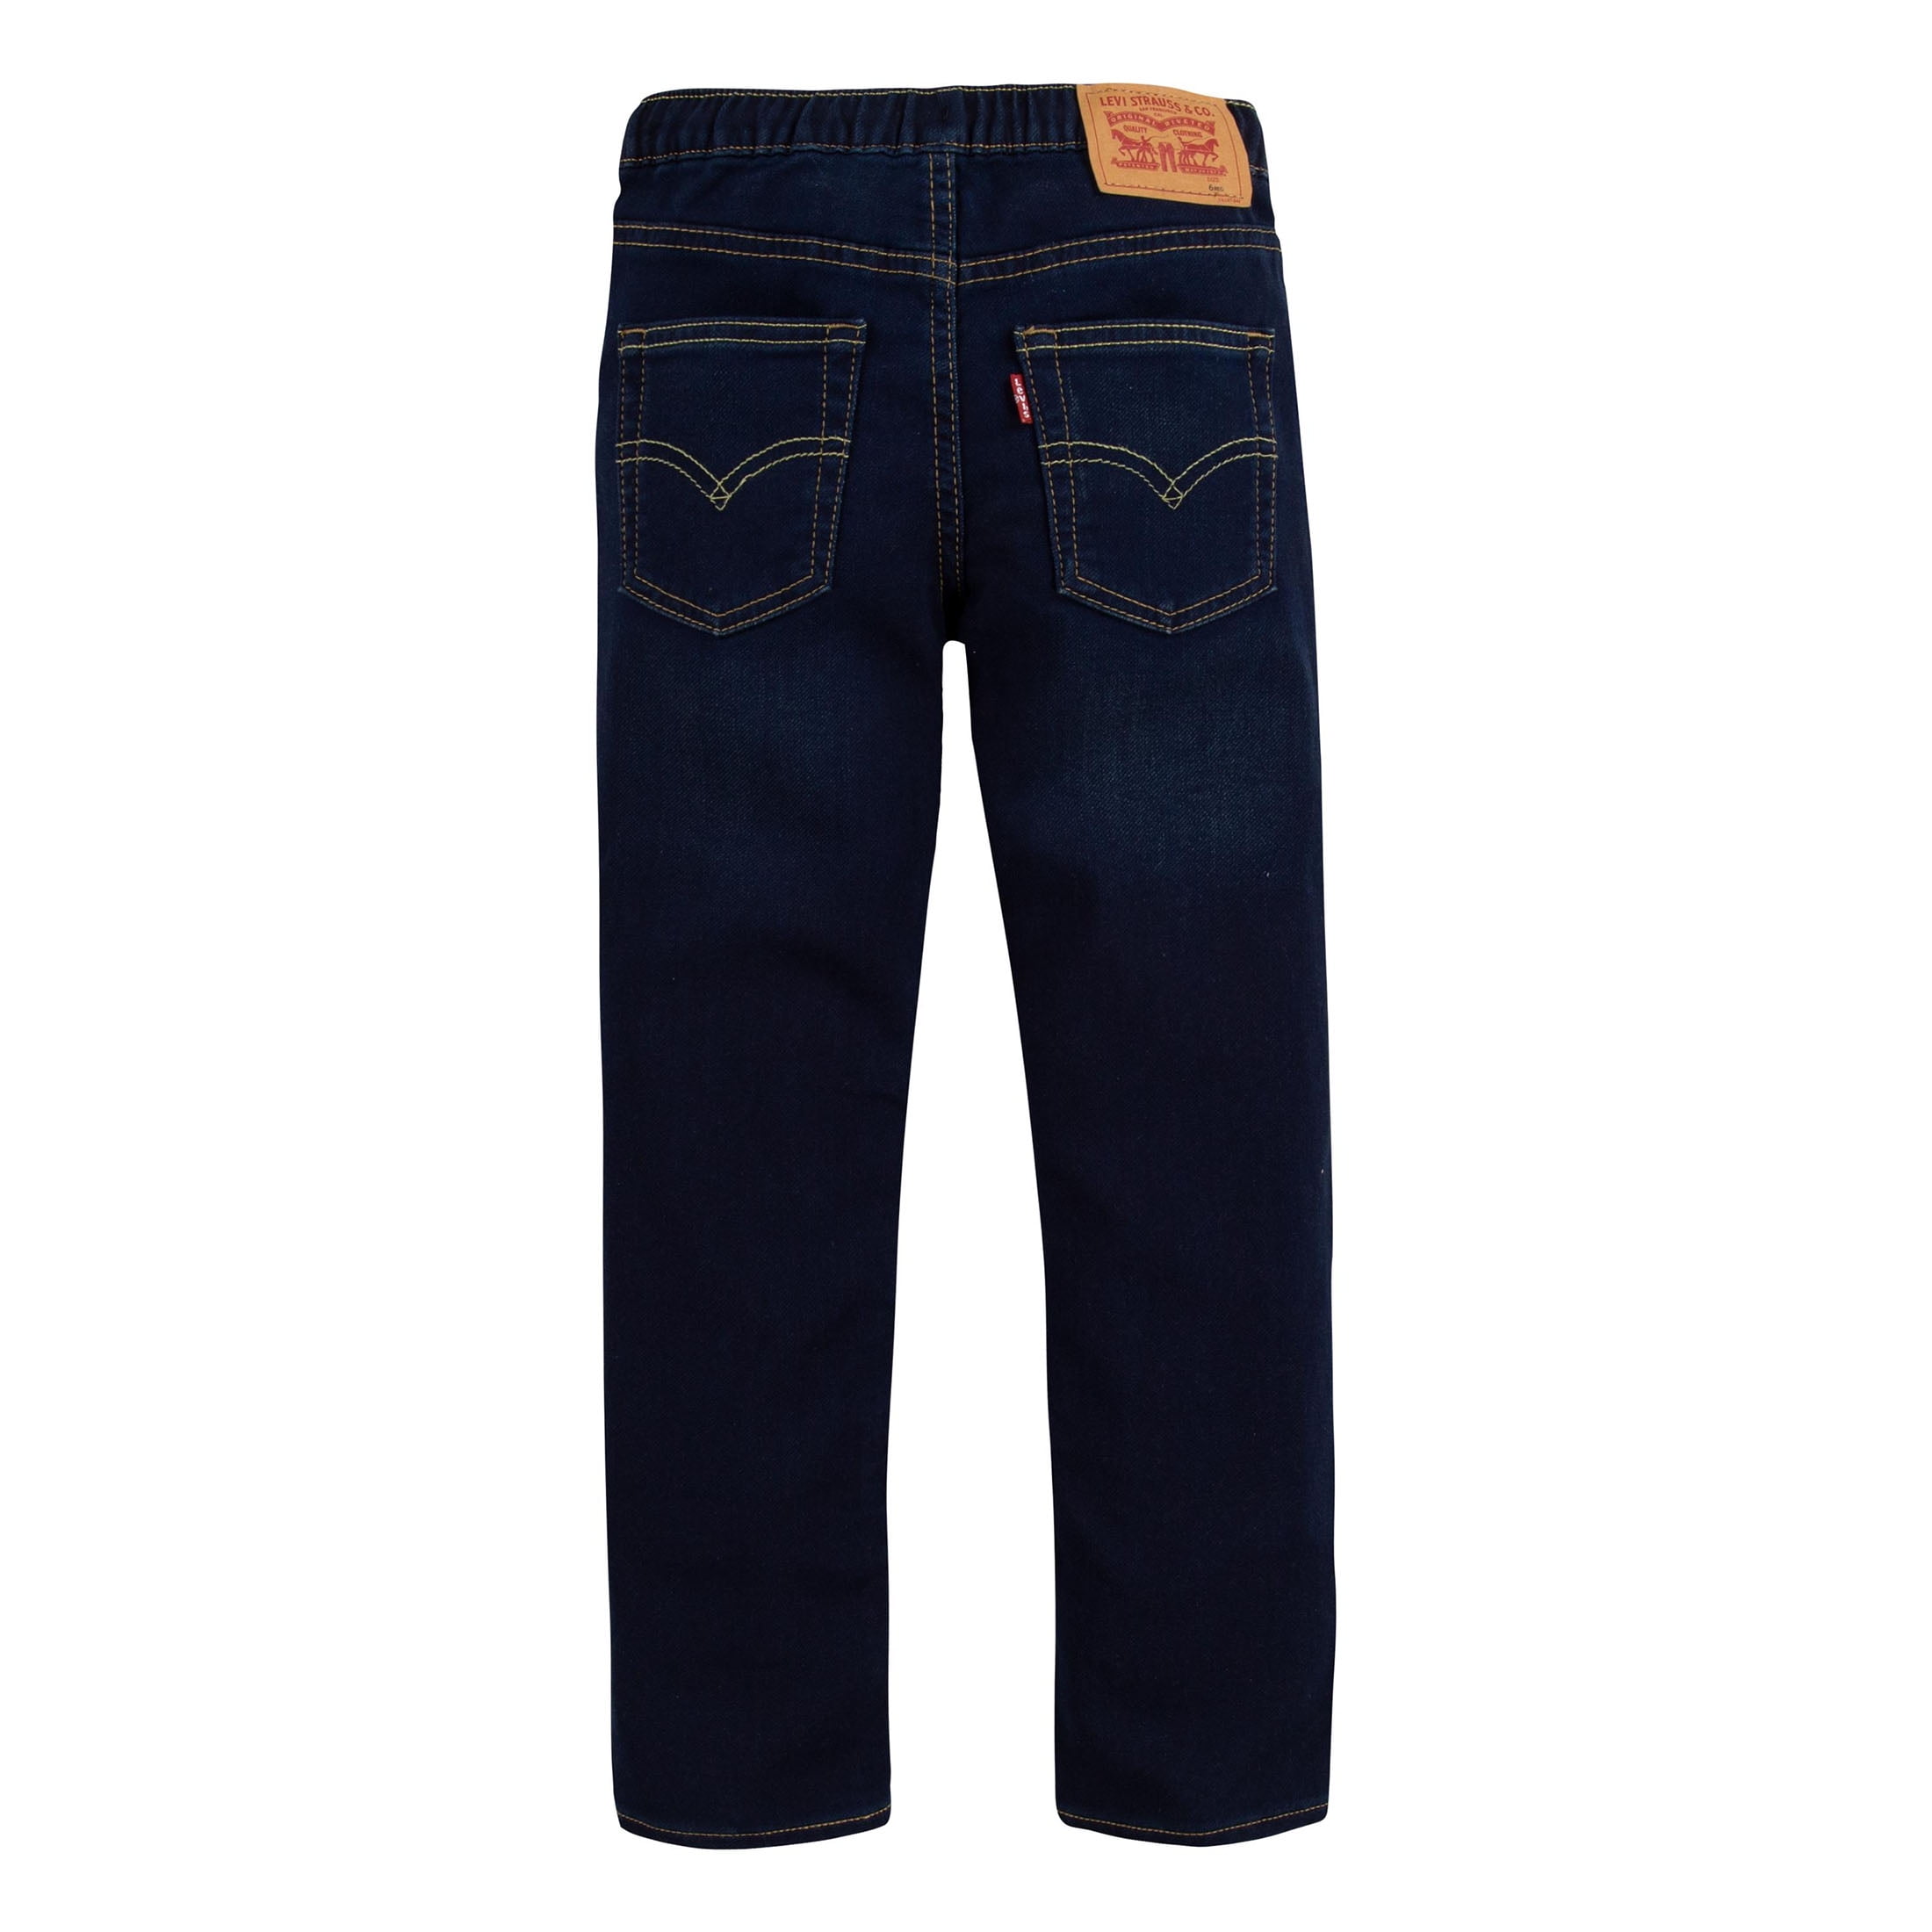 Levi's Boys Skinny Fit Pull On Jeans, Sizes 4-20 